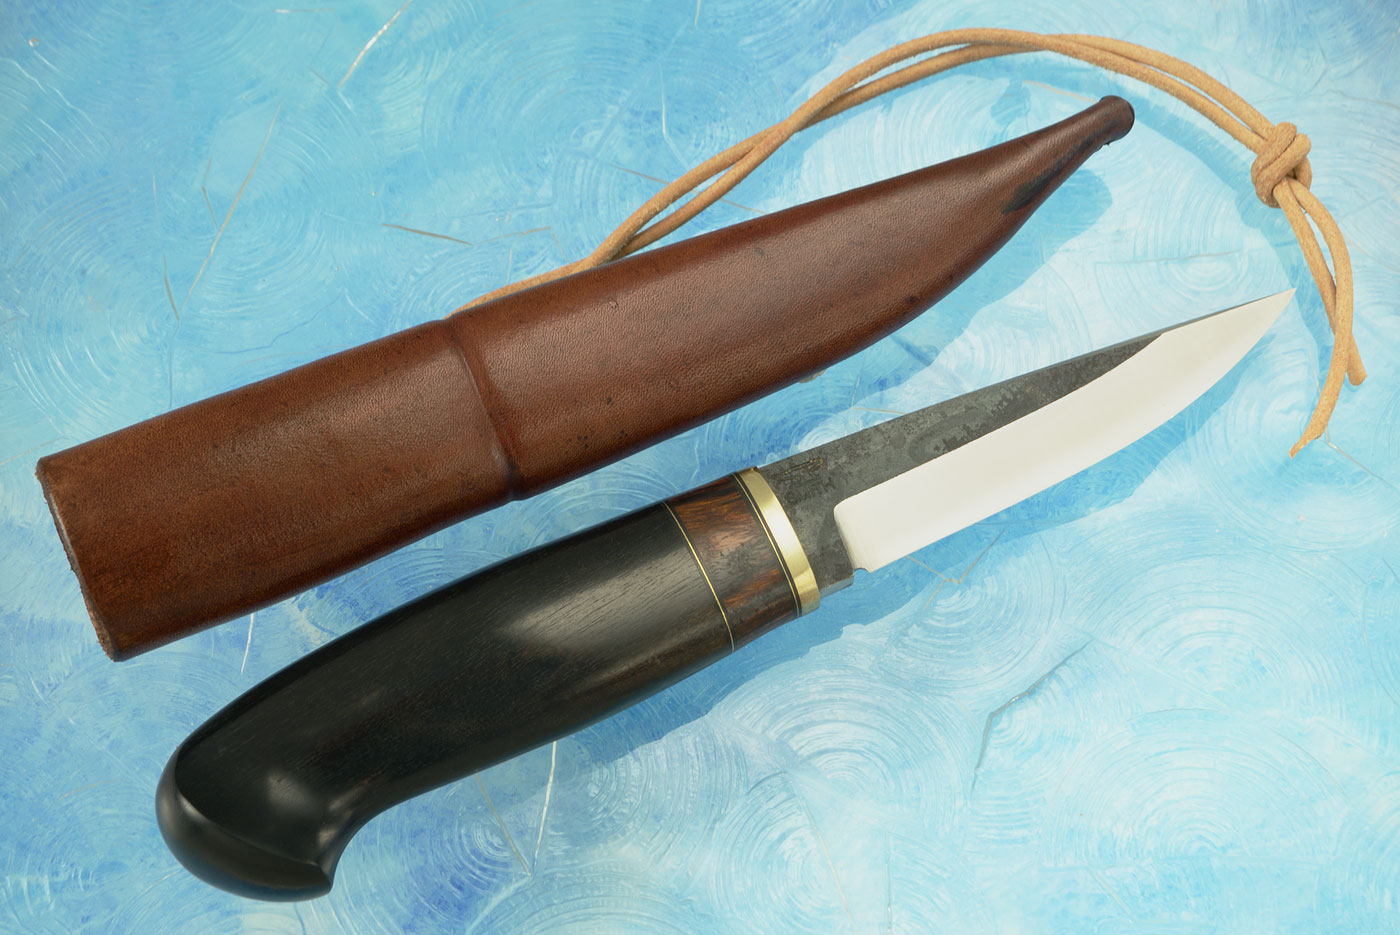 Hunter/Utility (Model L) with African Blackwood and Ironwood